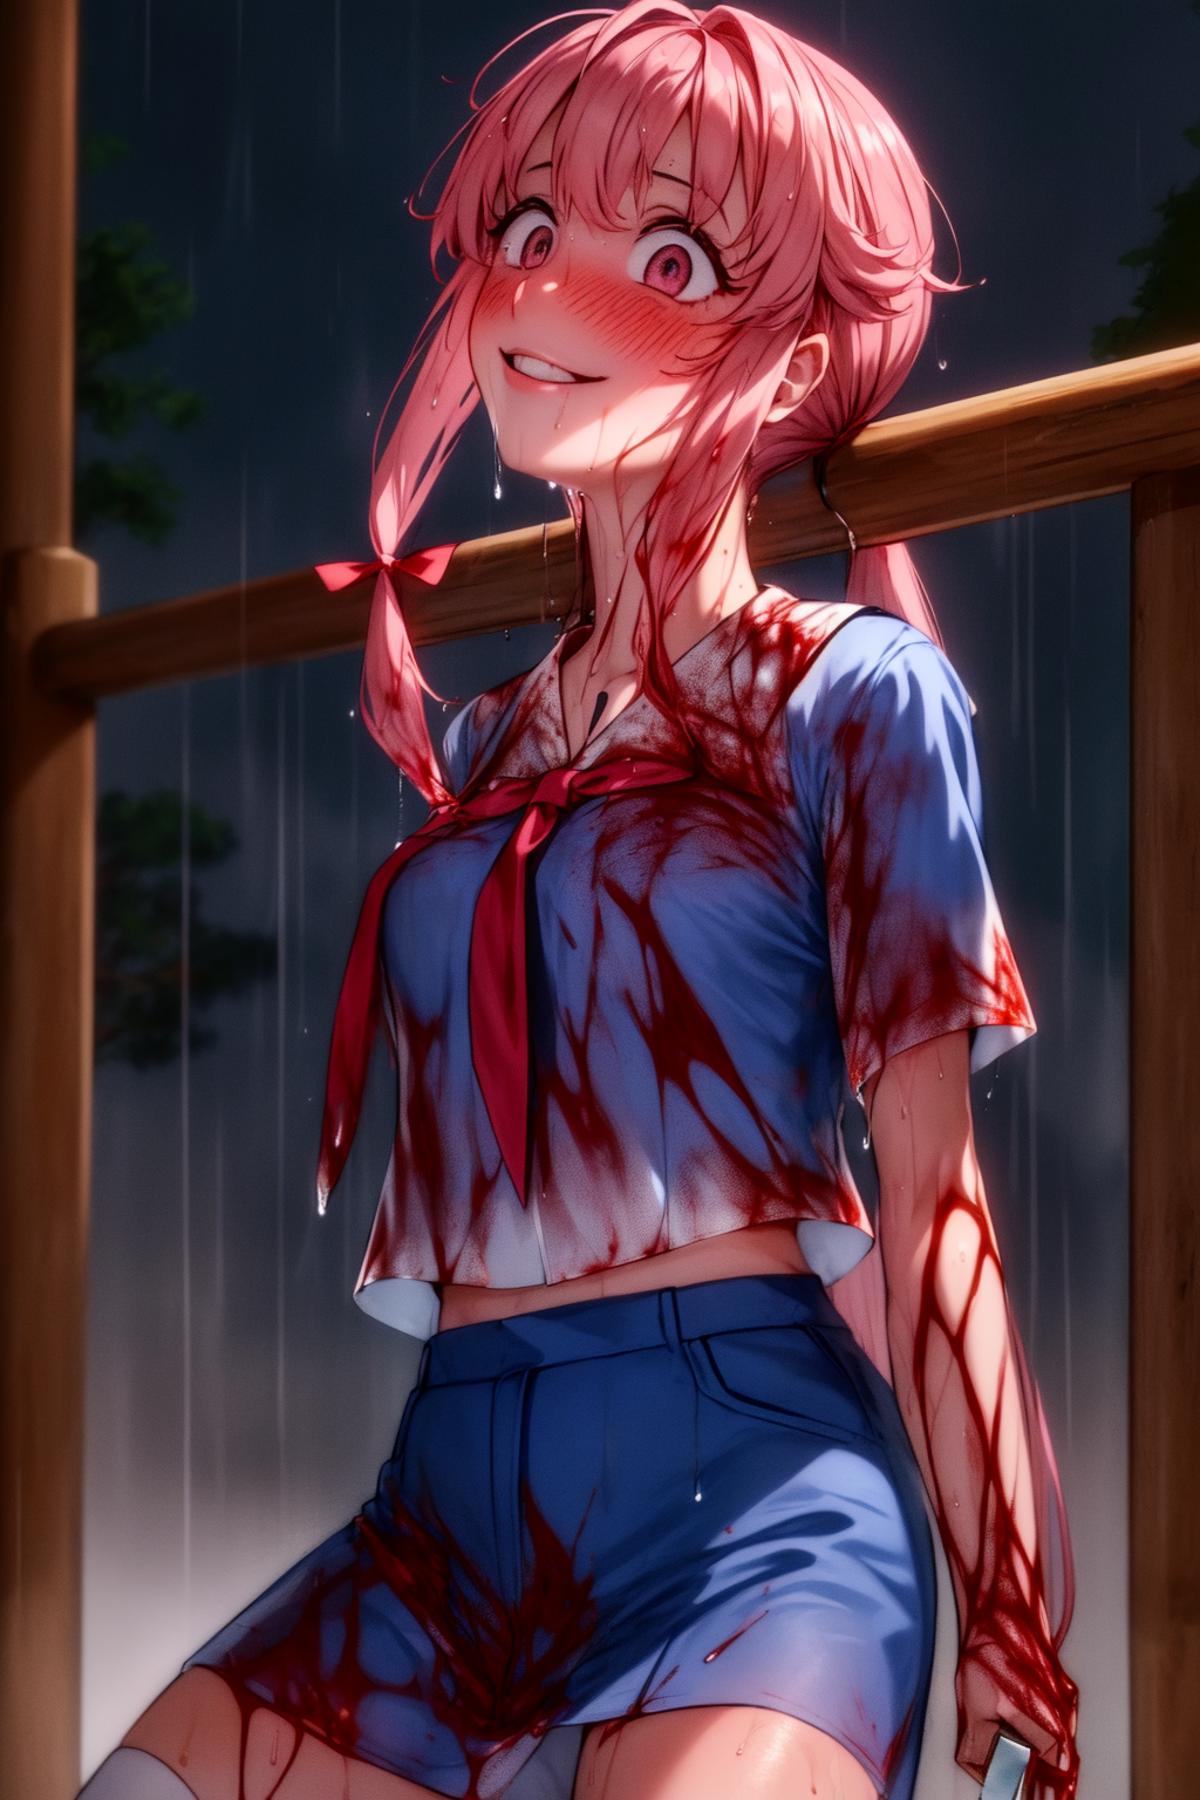 A girl with pink hair wearing a blue shirt and a red tie, covered in blood and smiling.